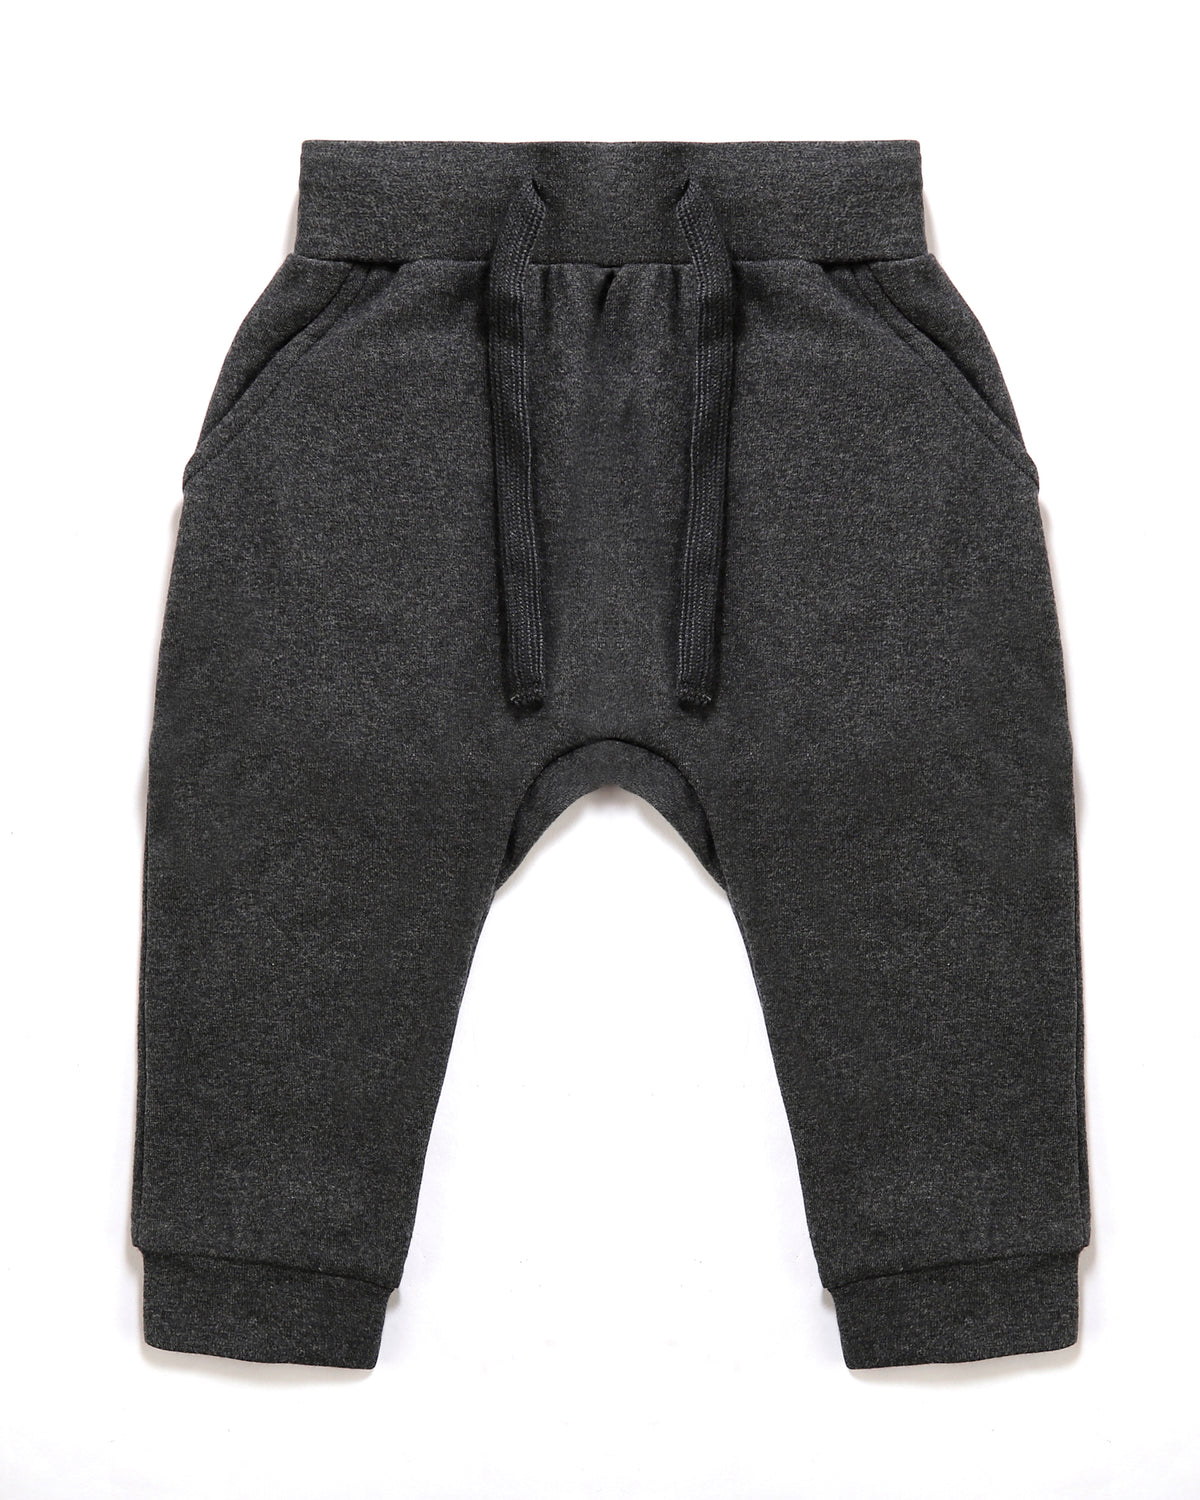 Slouch Trackie in Charcoal Front